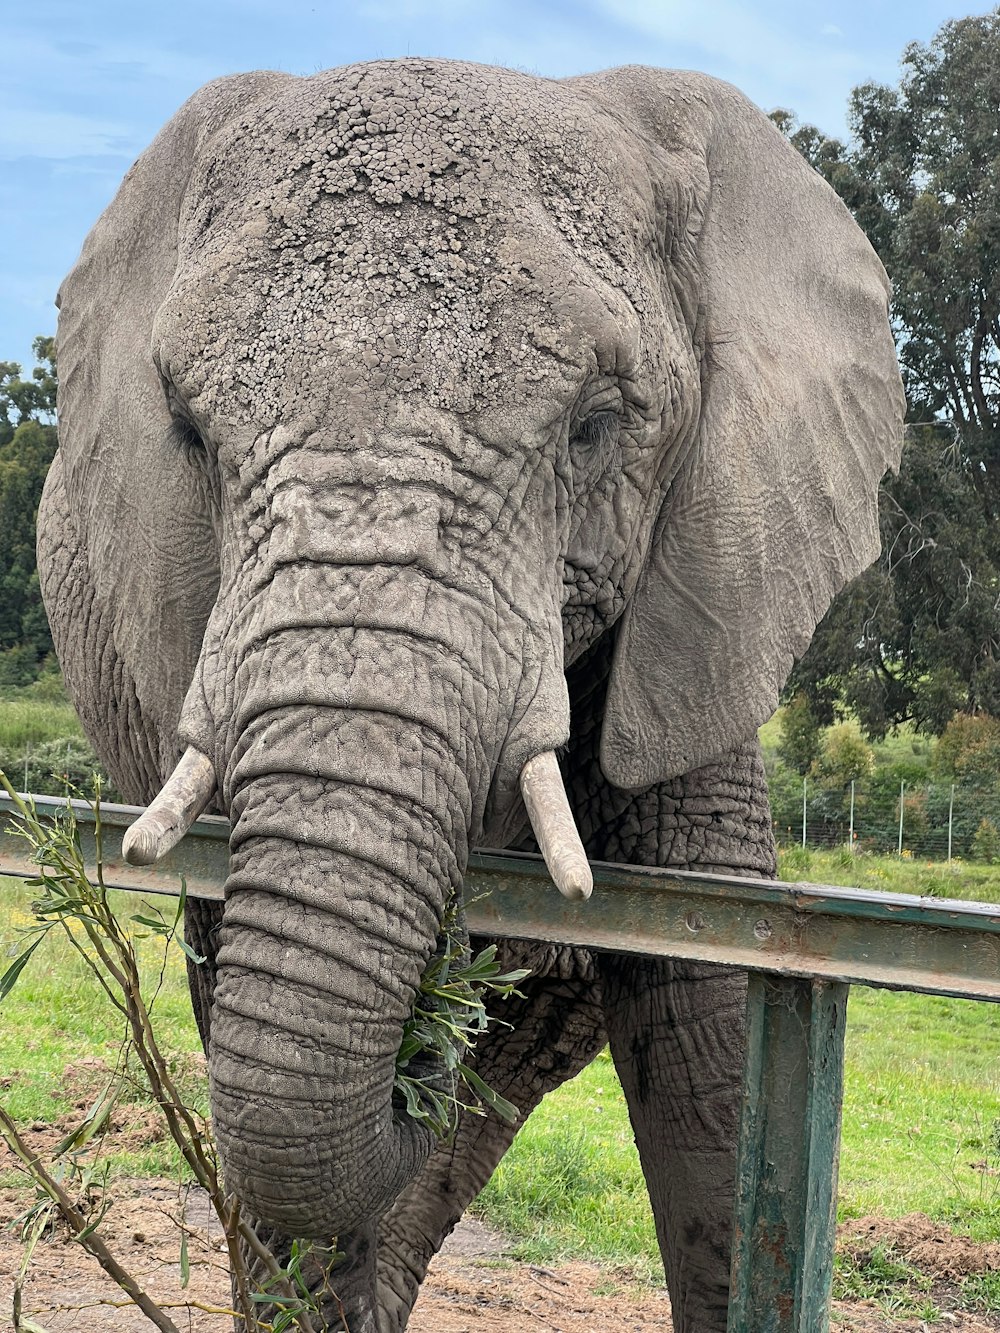 a large elephant standing next to a wooden fence